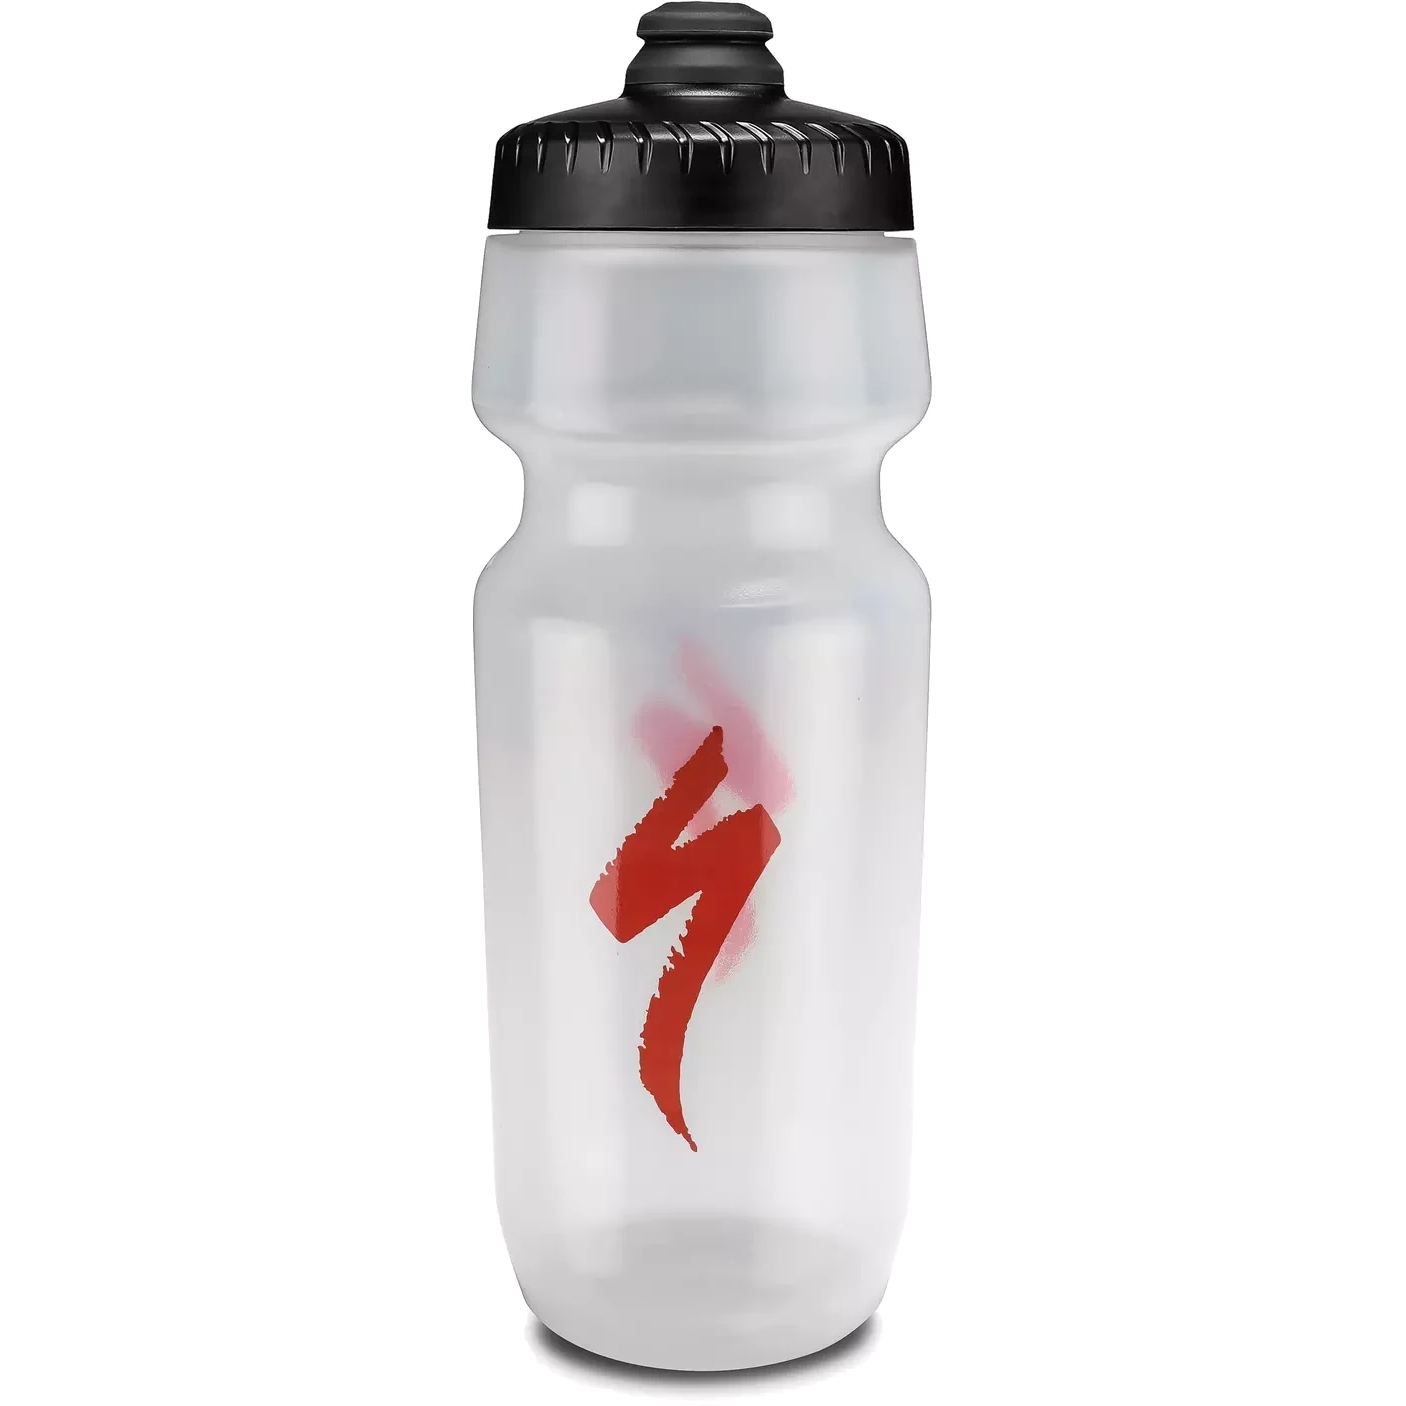 Productfoto van Specialized Big Mouth 2nd Gen Drinkfles 700ml - SBC Translucent S-Logo